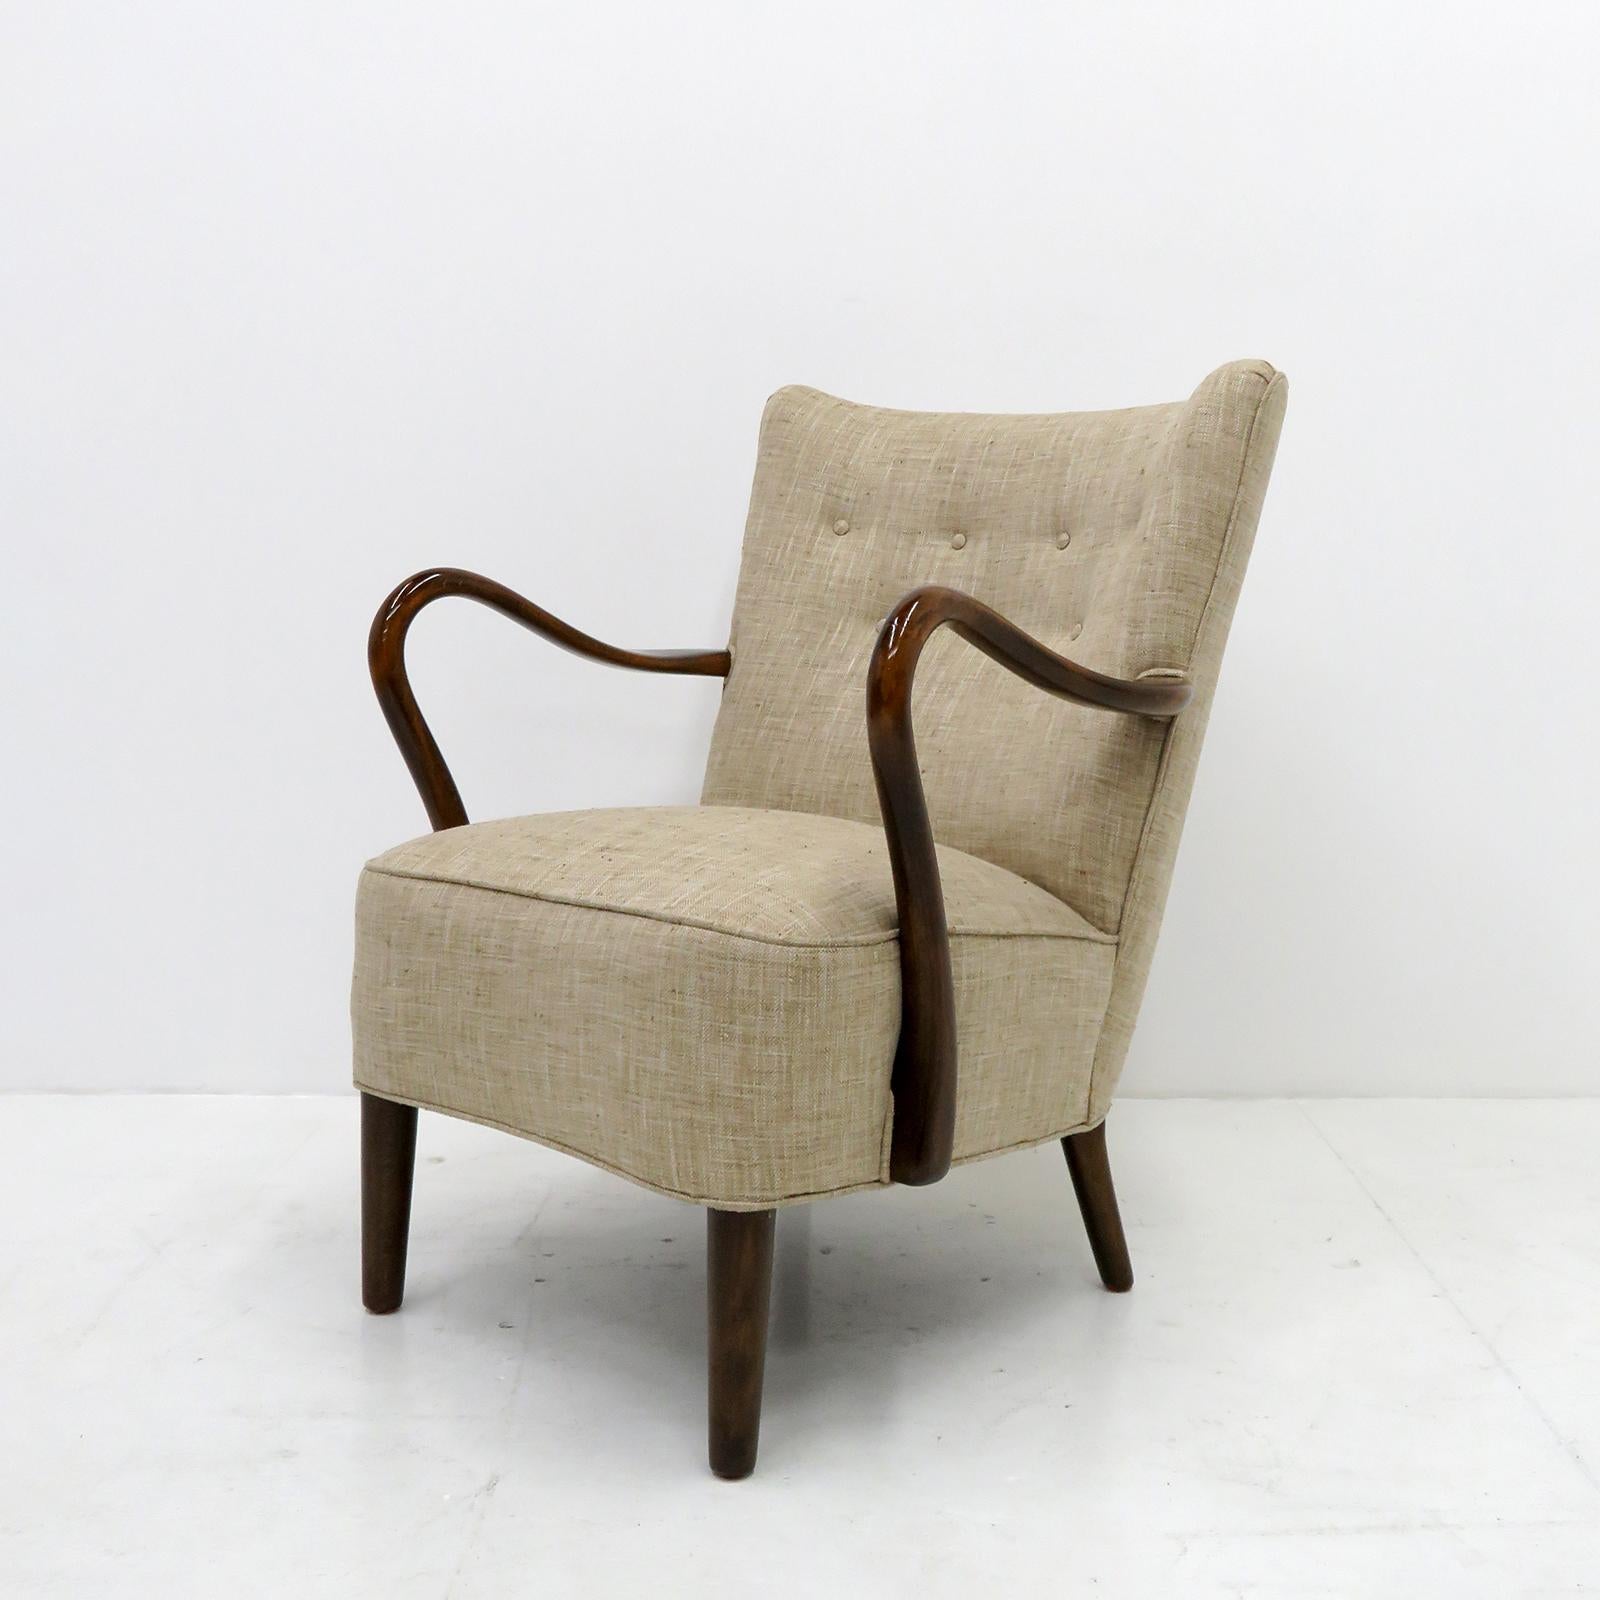 Danish Alfred Christensen Lounge Chair, 1950 For Sale